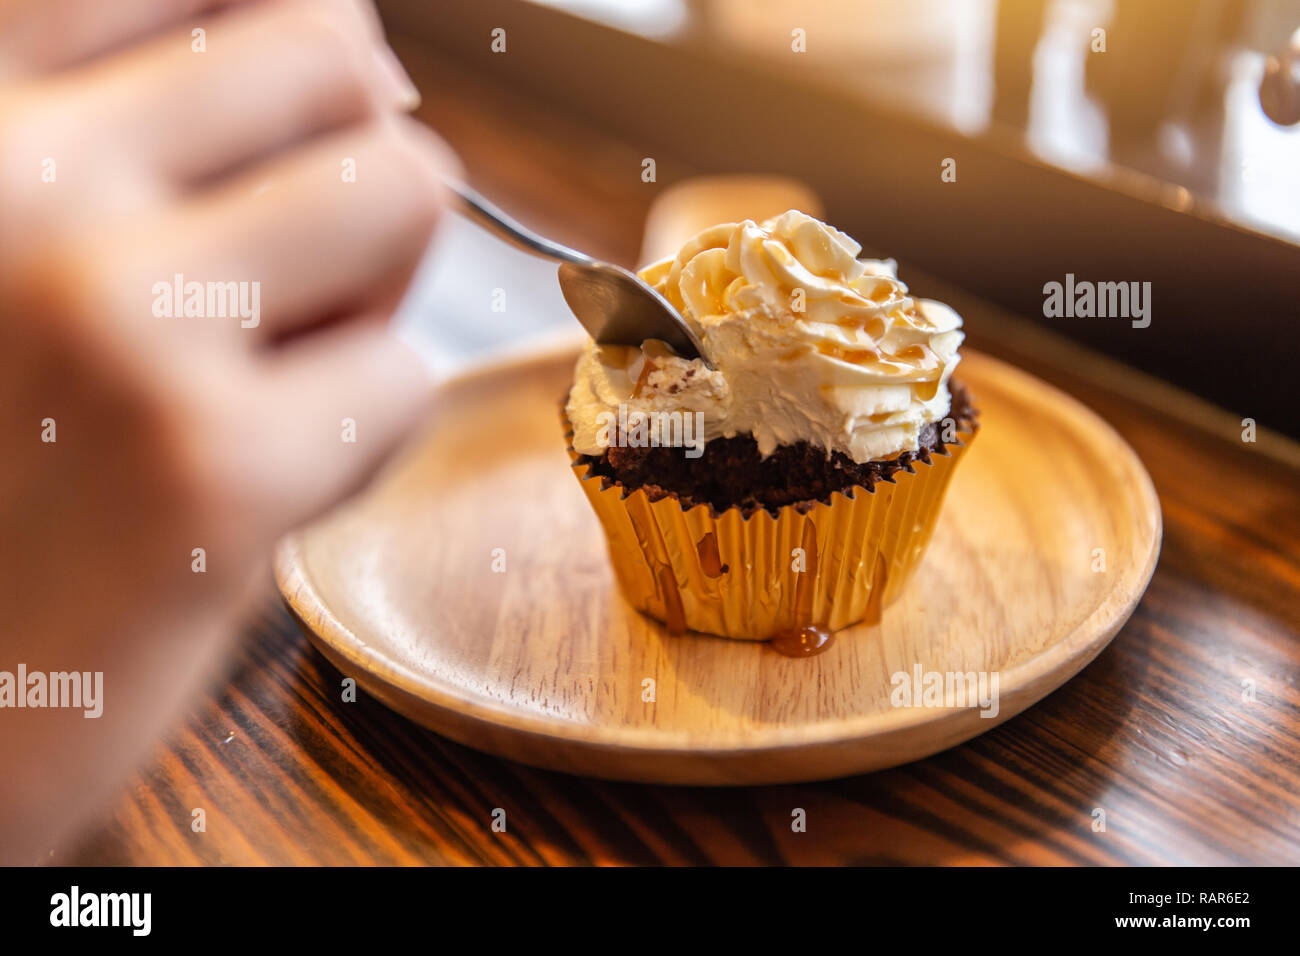 Eating cream cup cake sugar sweet delicious fat unhealthy food. Stock Photo